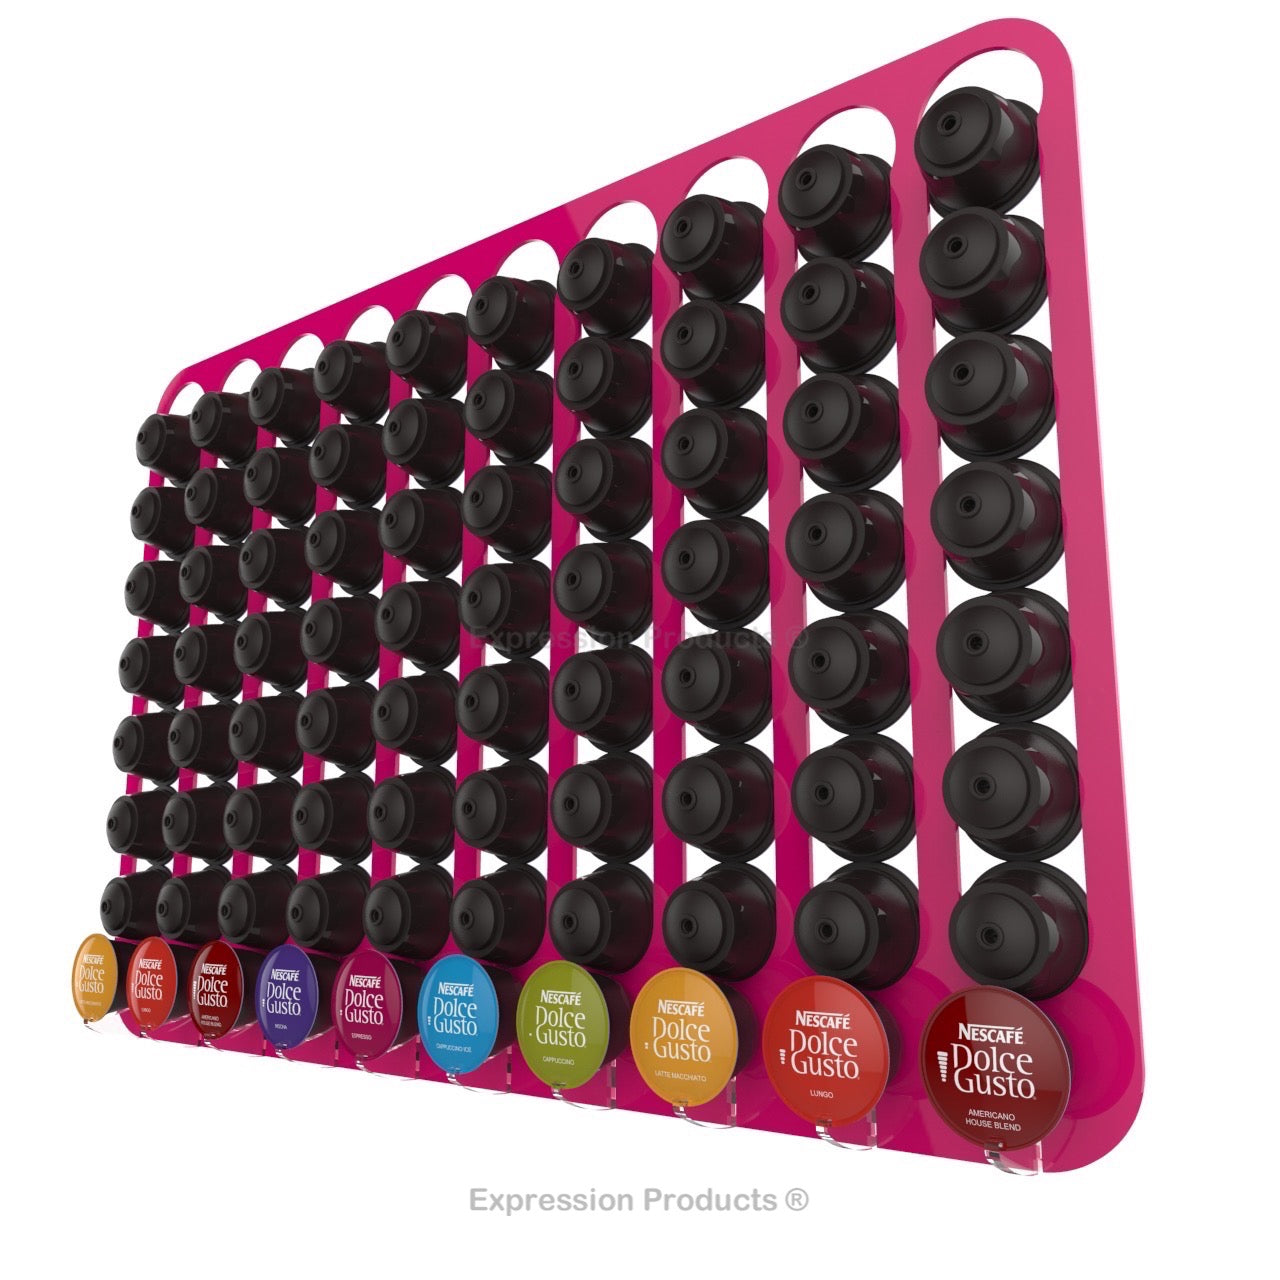 Dolce Gusto Coffee Pod Holder, Wall Mounted.  Shown in Pink Holding 80 Pods